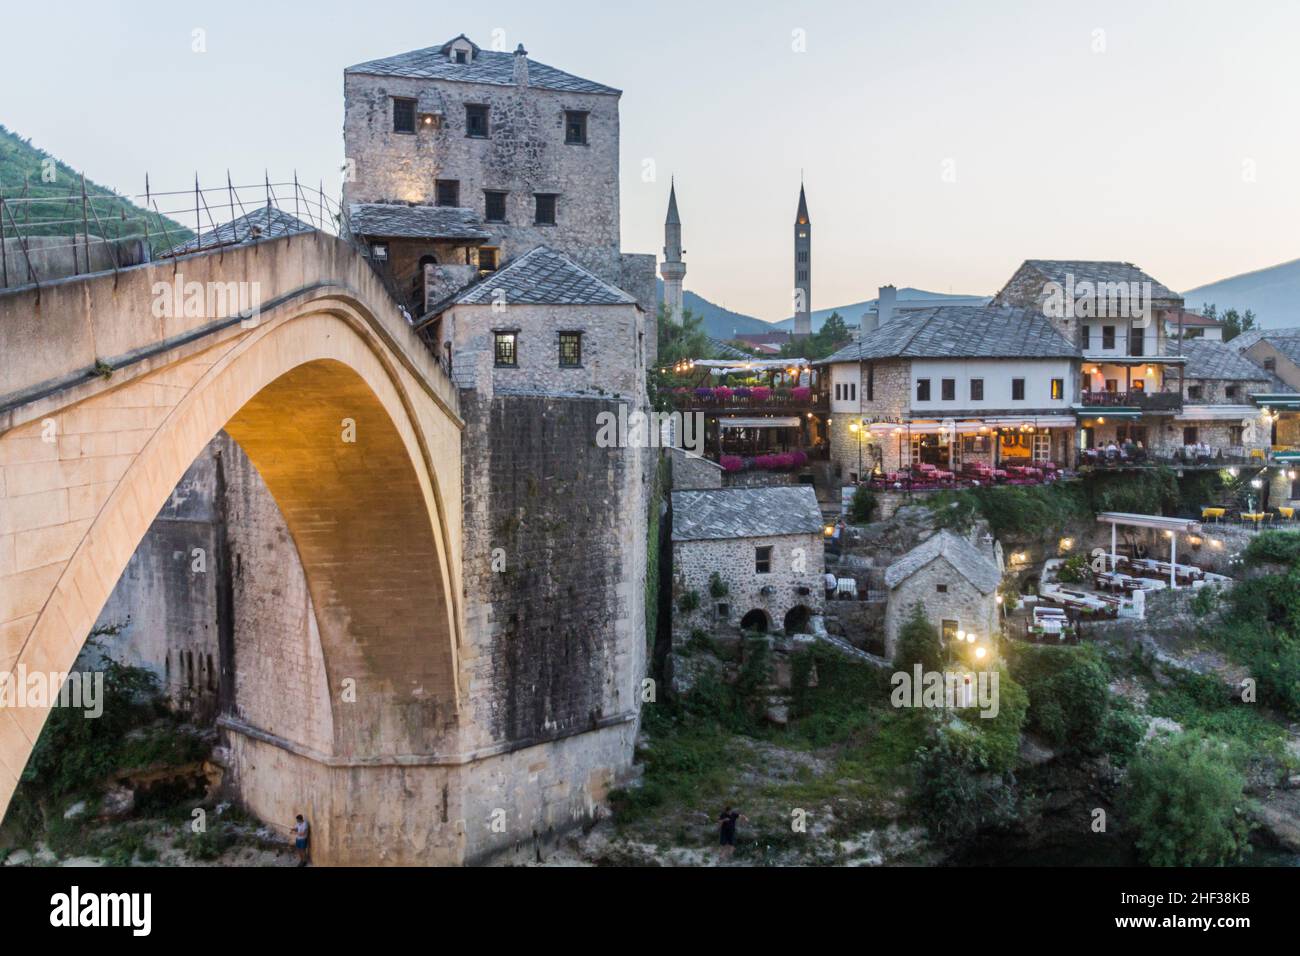 Evening view of Stari most (Old Bridge) and old stone buildings in Mostar. Bosnia and Herzegovina Stock Photo